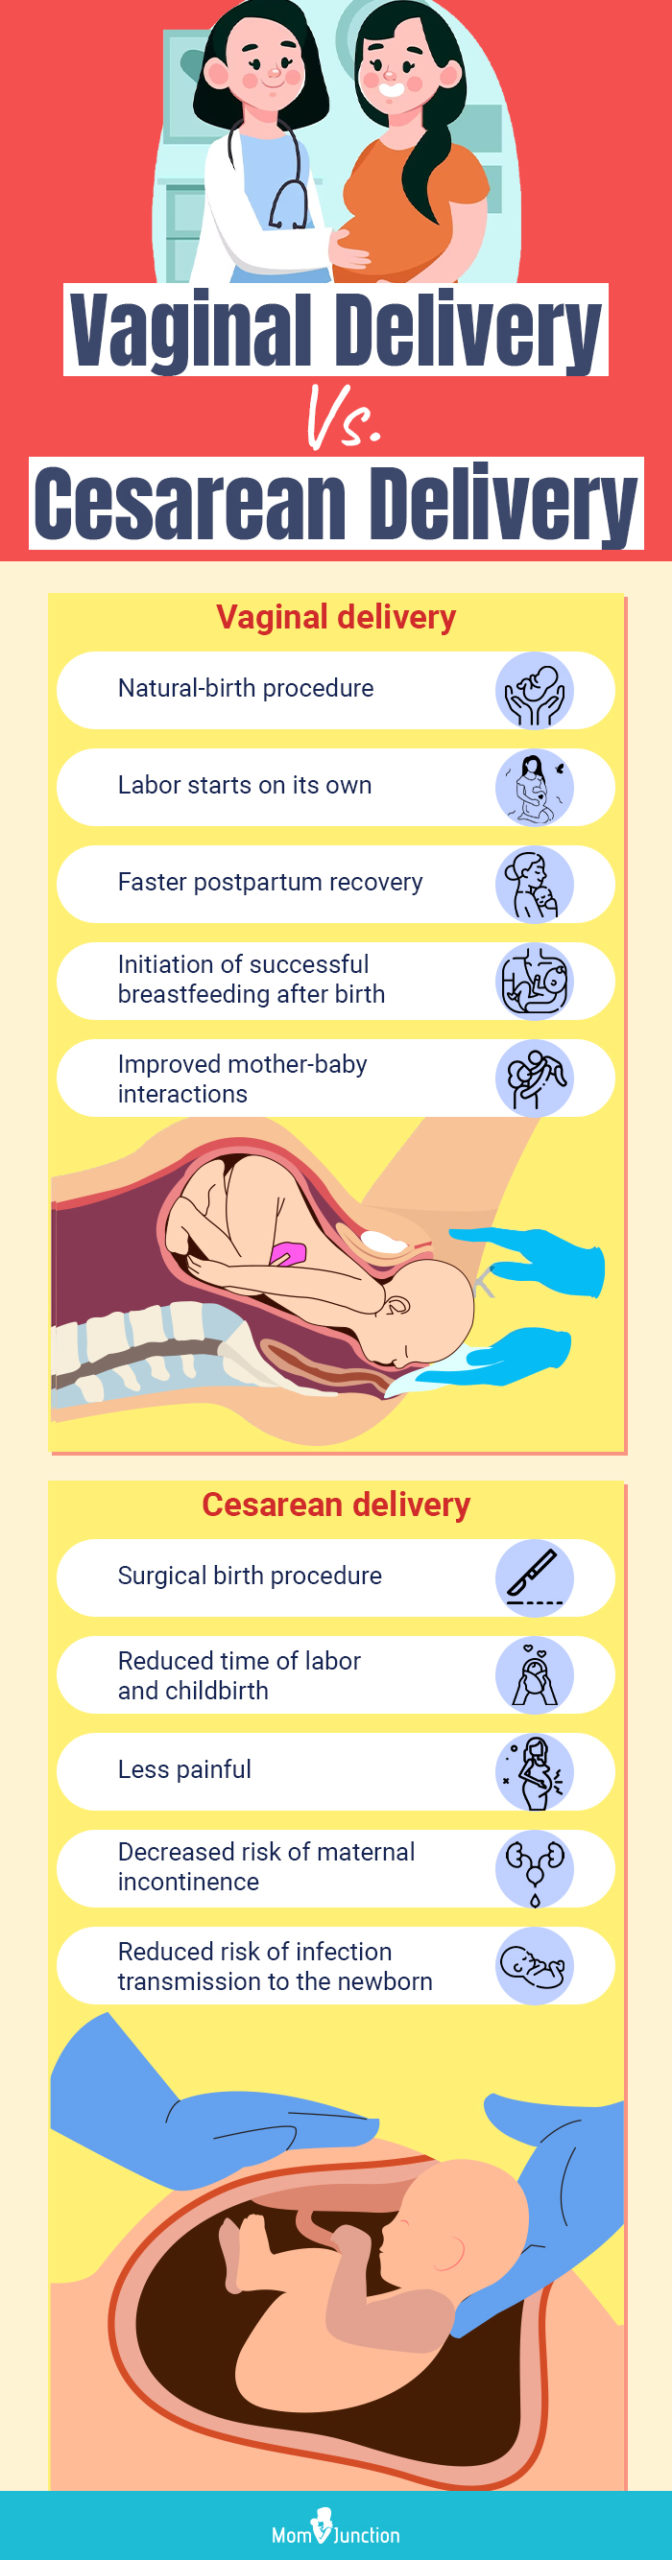 C-Section Vs. Normal Delivery: How Are They Different